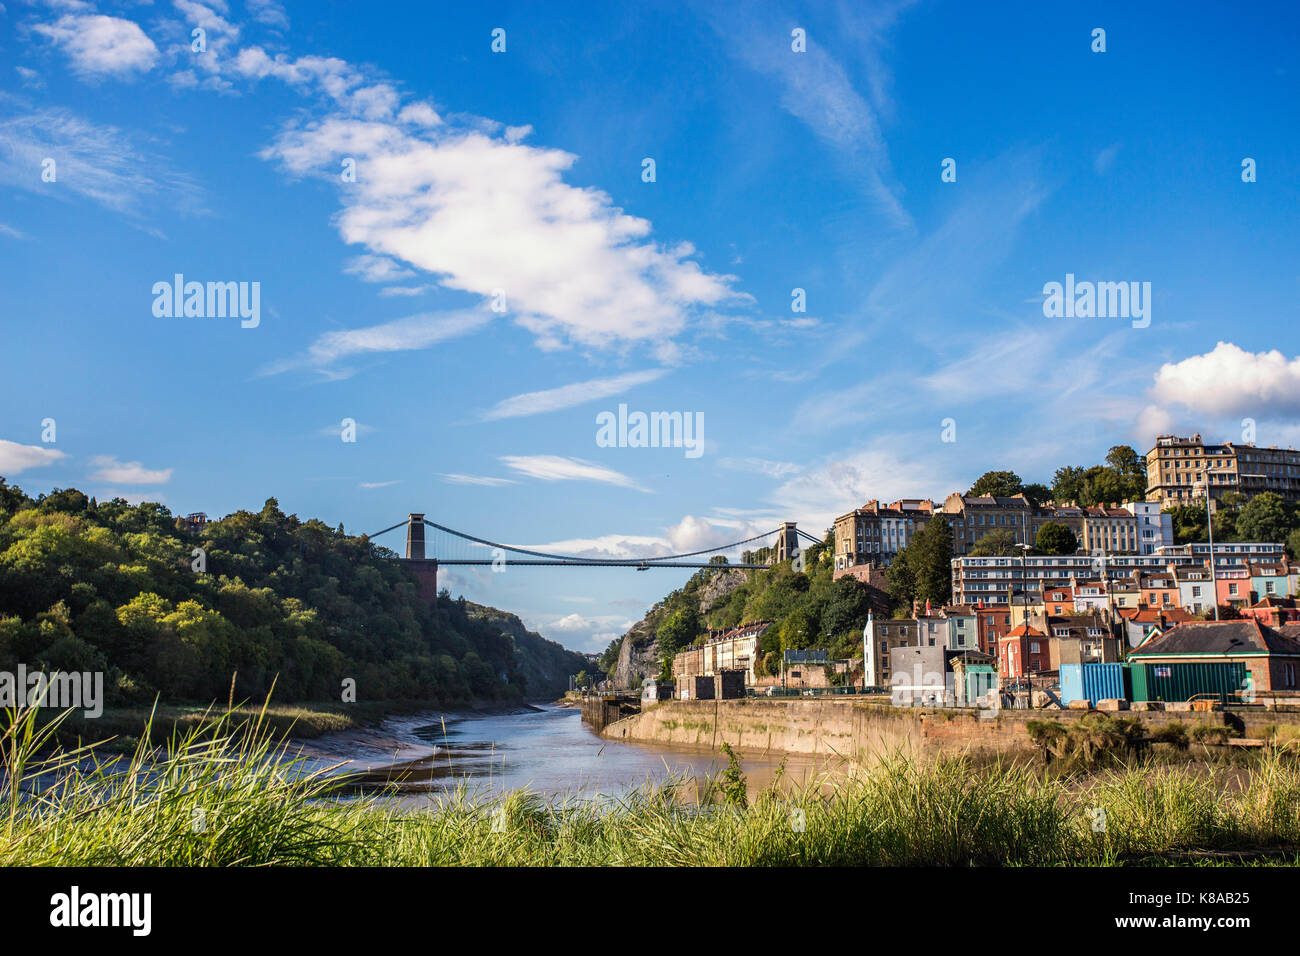 The Clifton suspension bridge straddles the Avon gorge with the river Avon below at a low tide Stock Photo